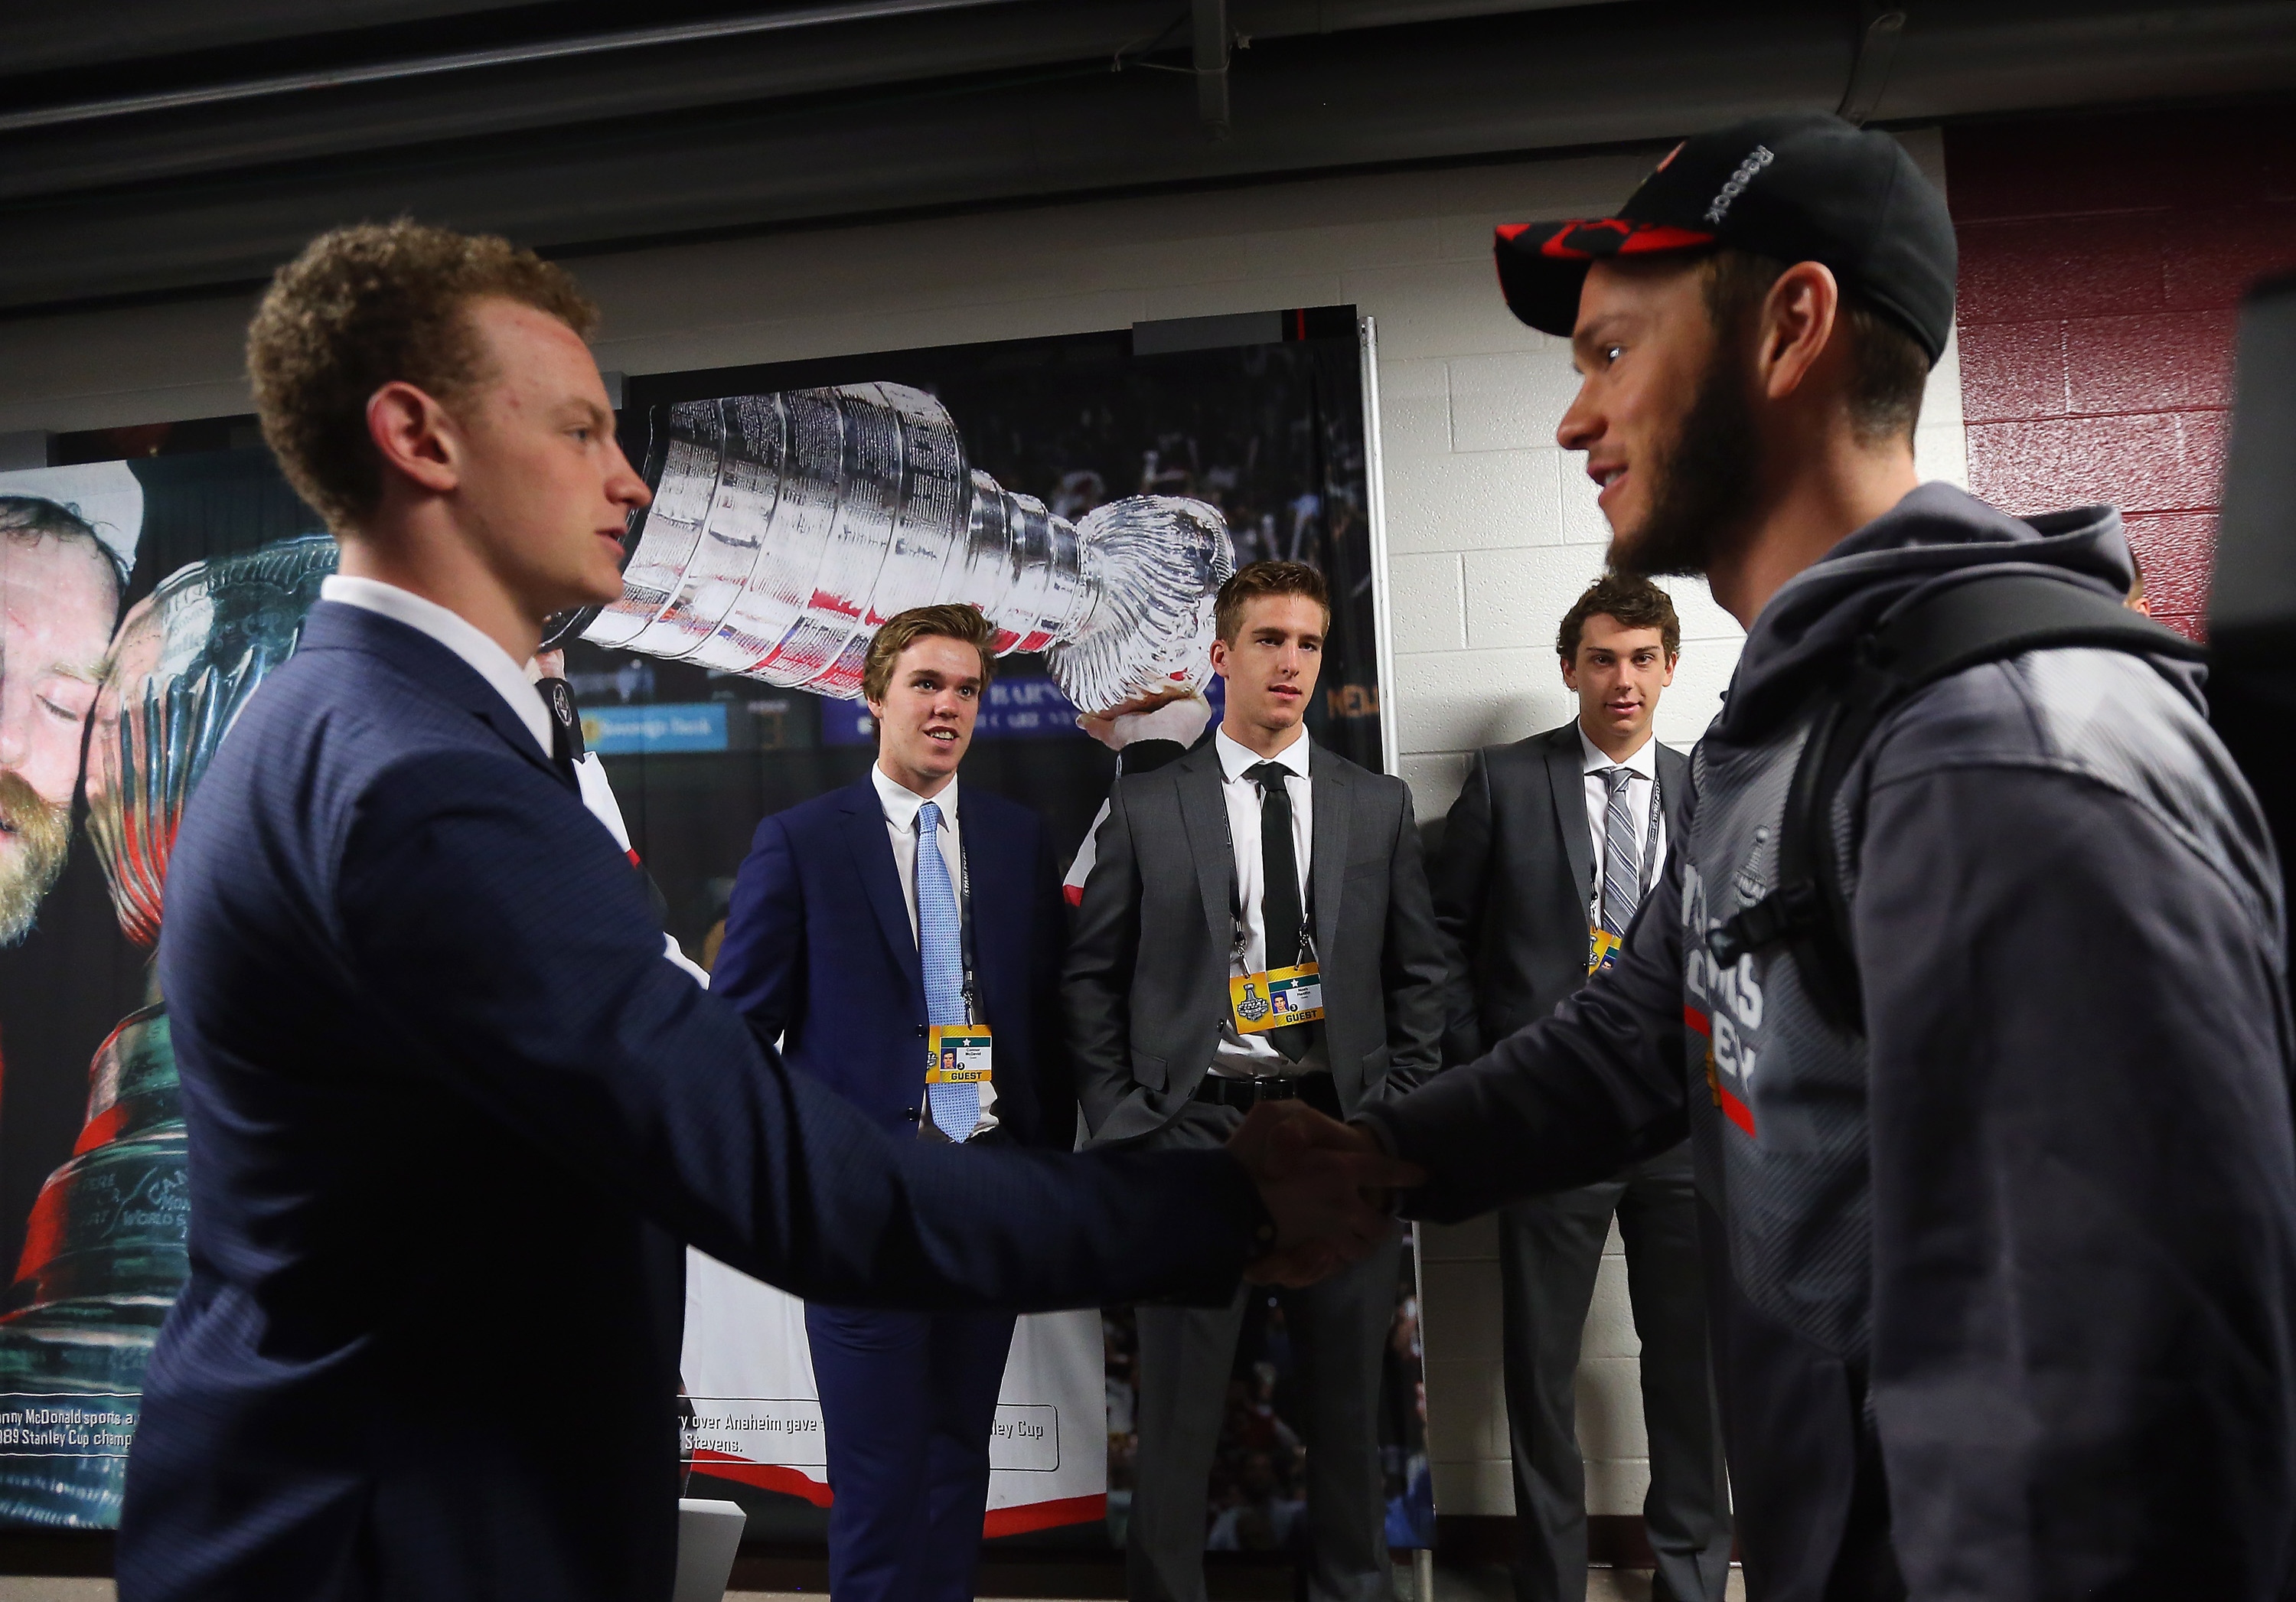 CHICAGO, IL - JUNE 08:  (l-r) Jack Eichel, Connor McDavid, Noah Hanafin, Dylan Strome and Chicago Blackhawk Jonathan Toews chat following a media availability at United Center on June 8, 2015 in Chicago, Illinois.  (Photo by Bruce Bennett/Getty Images)